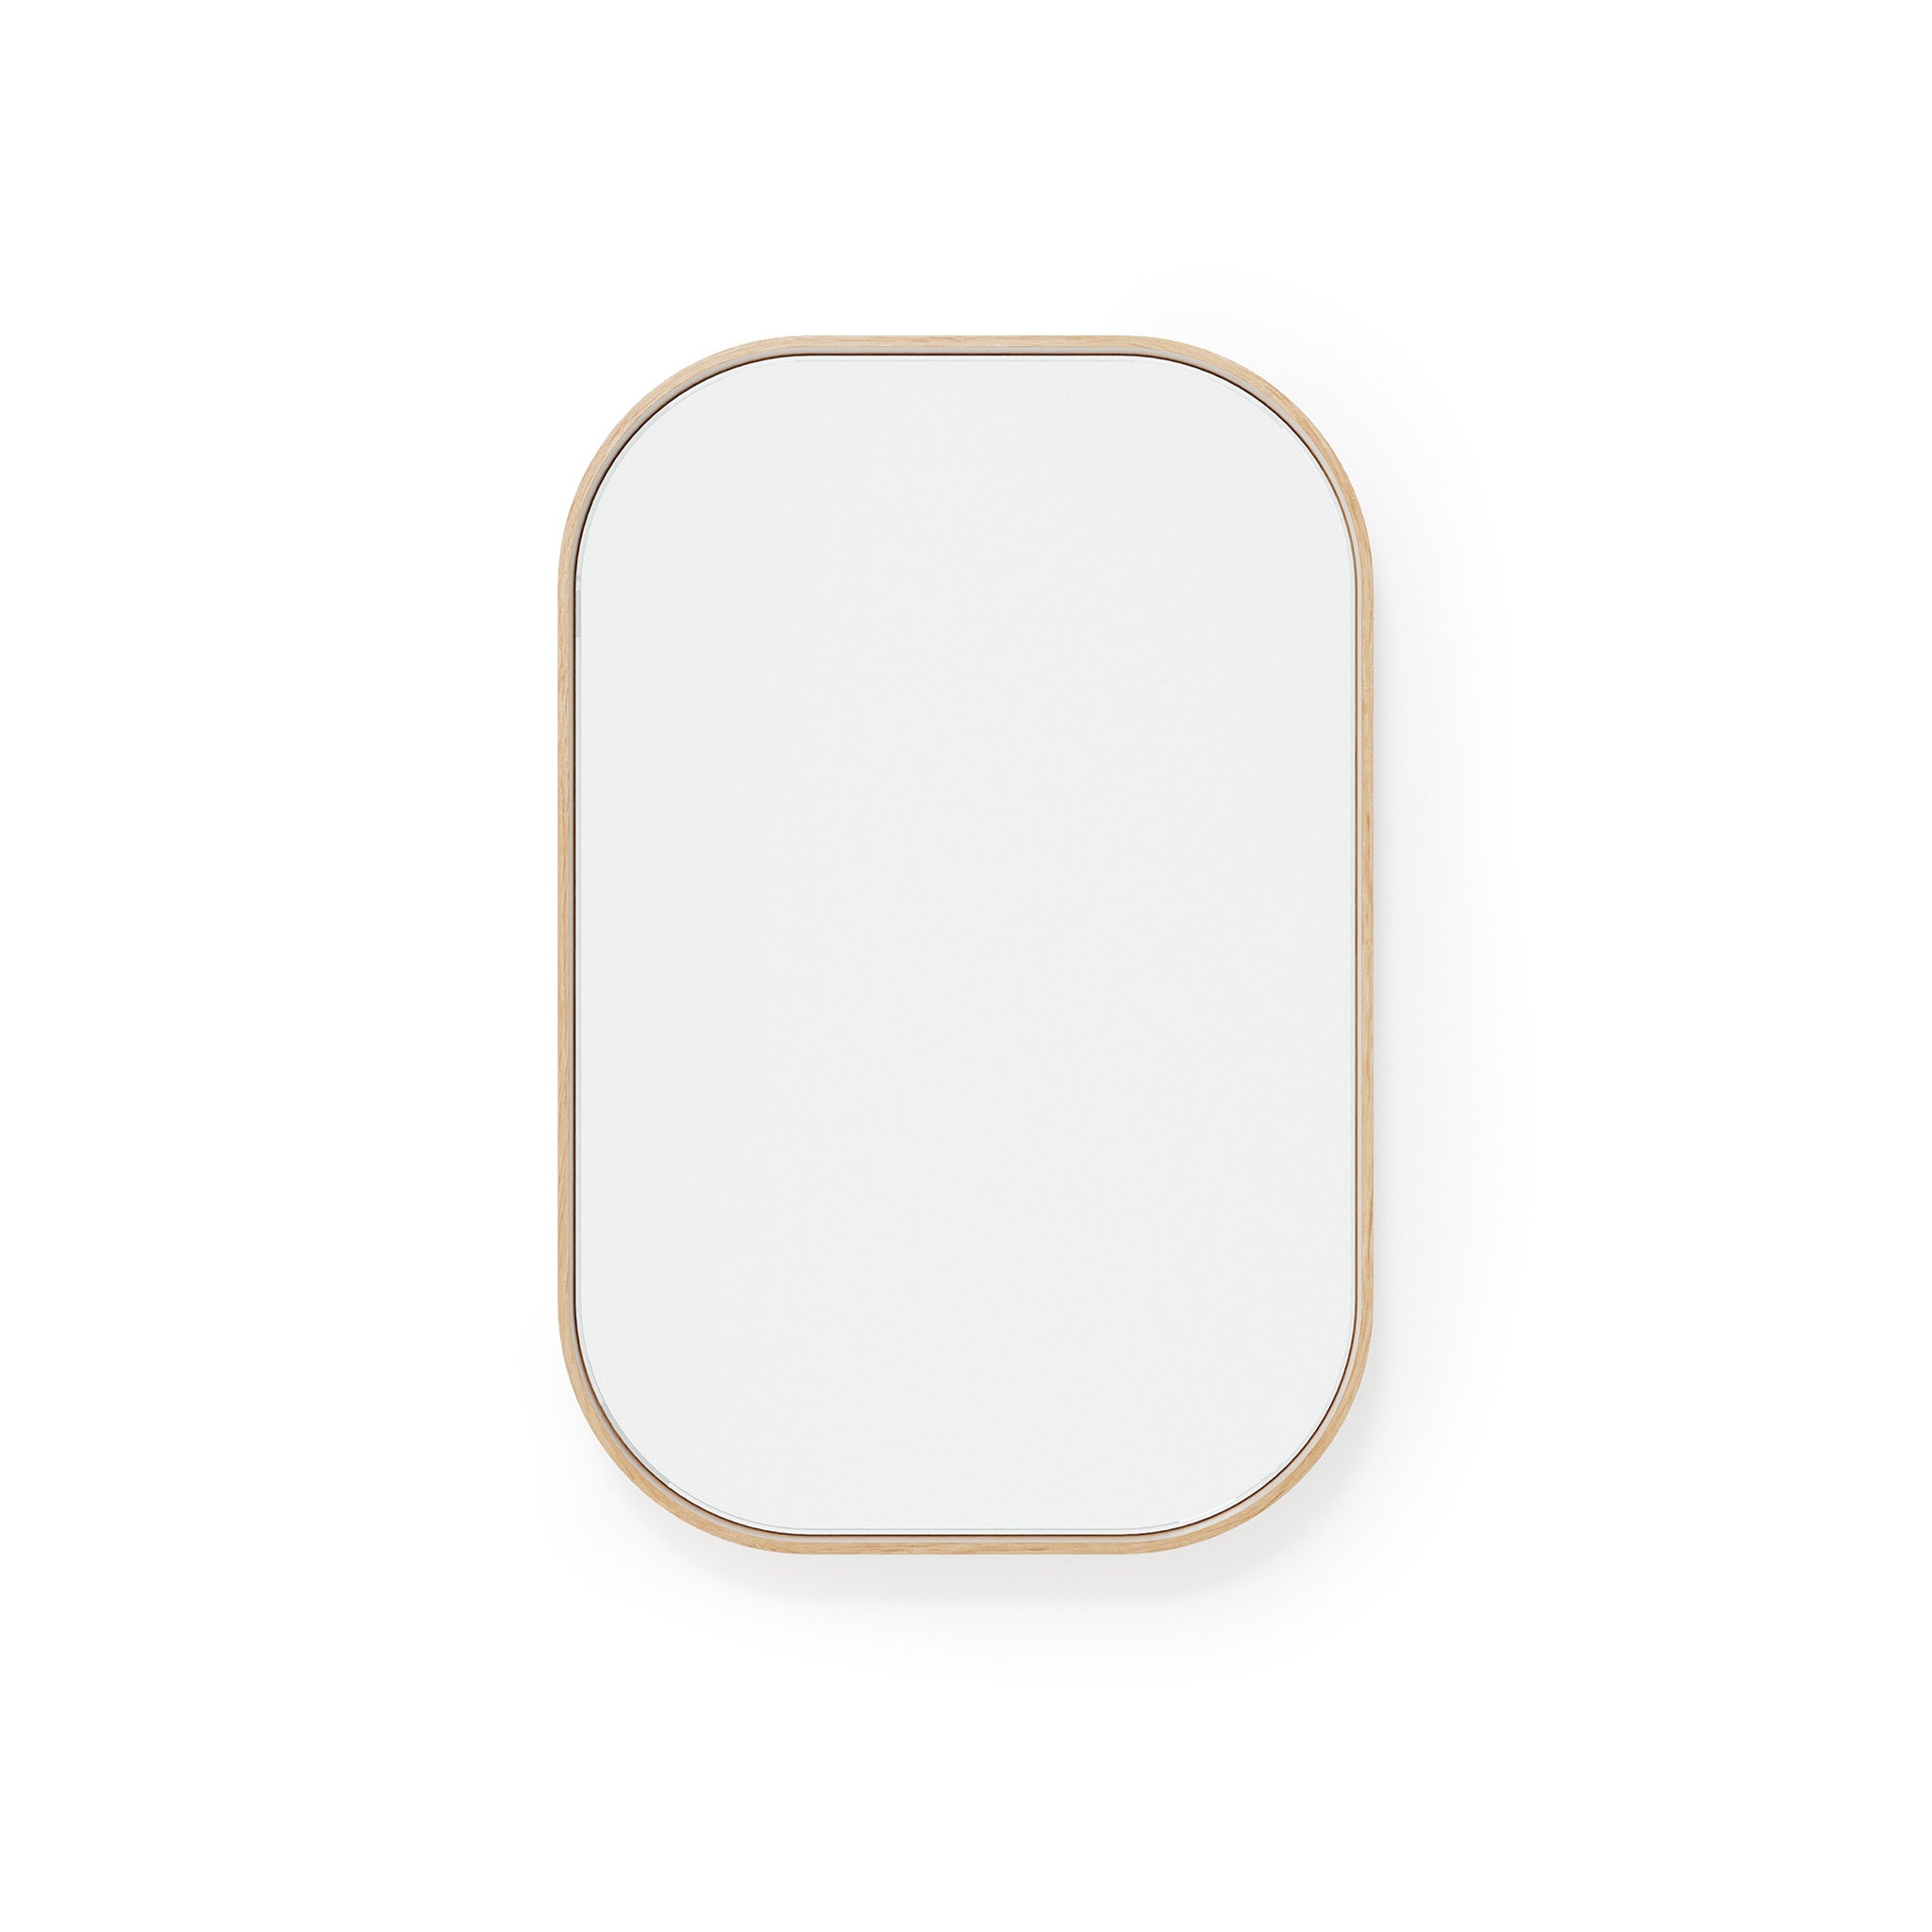 Outlook Rectangular Mirror by Lincoln Rivers for Wireworks